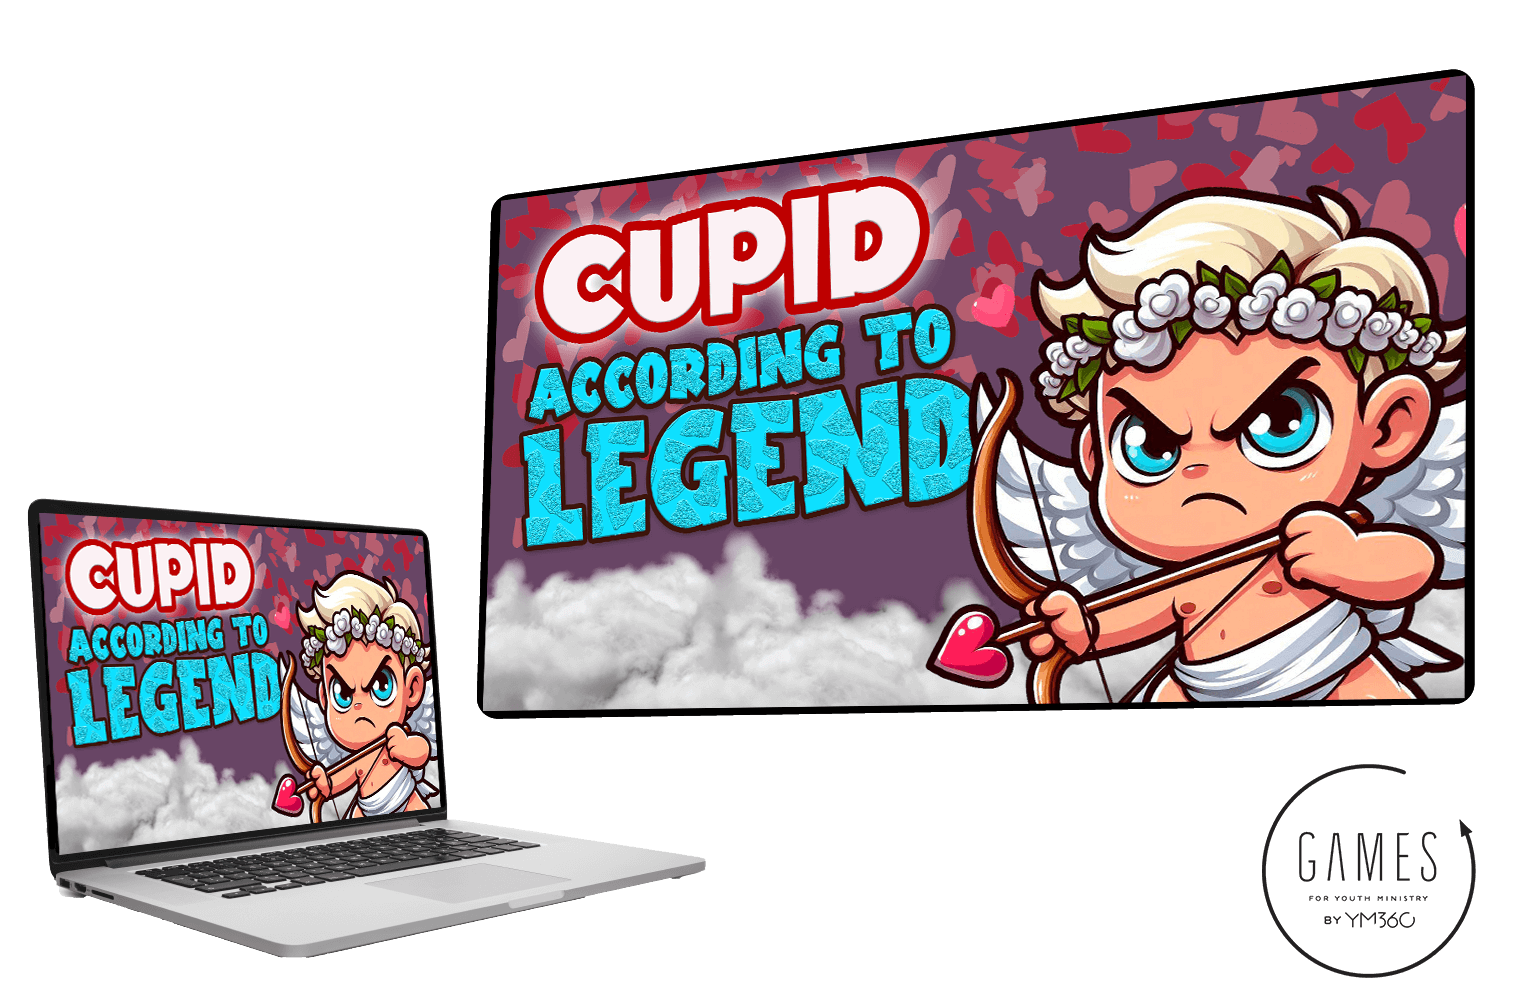 About Cupid®